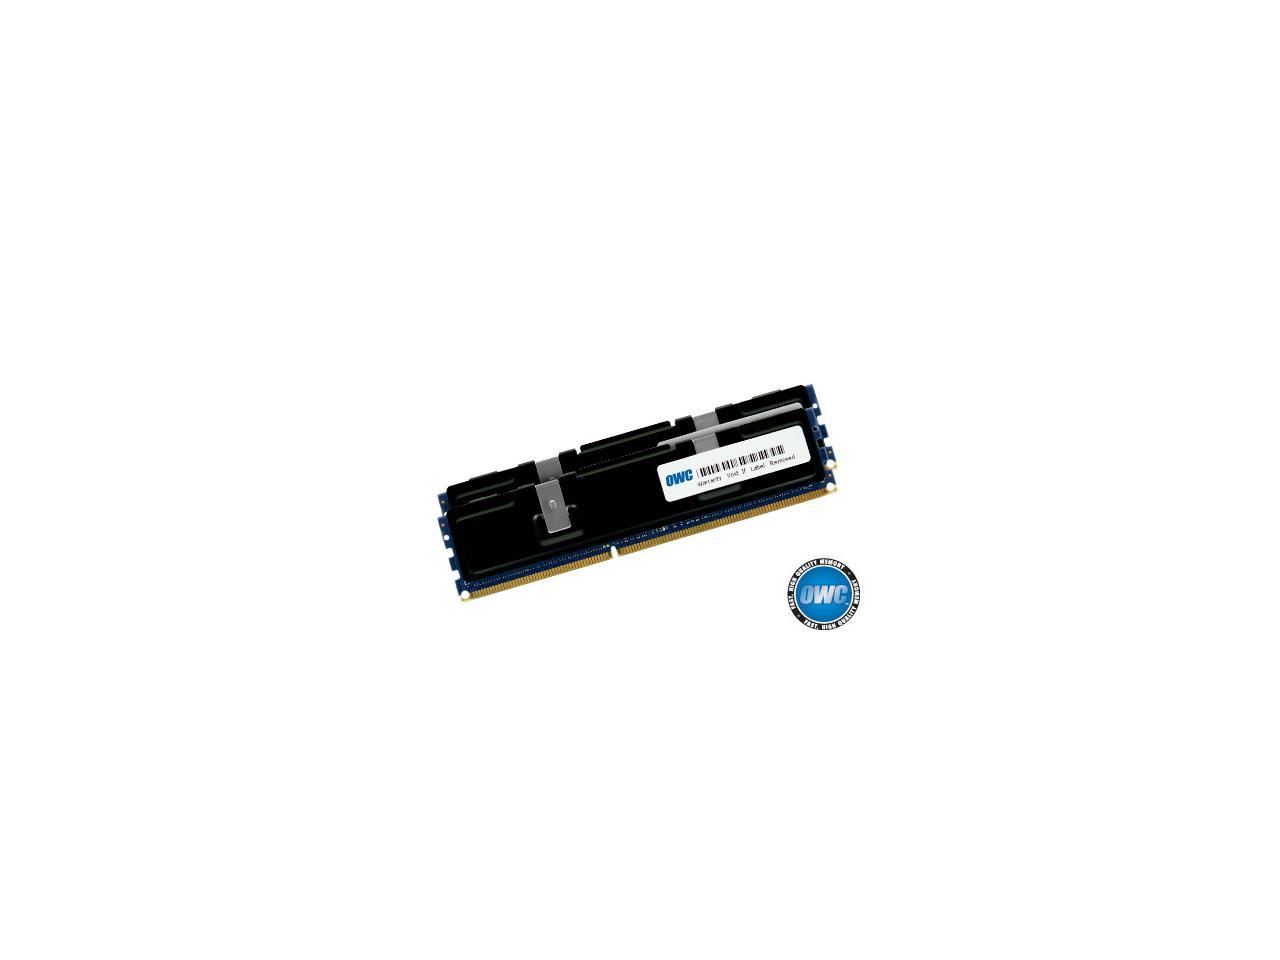 OWC 32GB ( 2x16GB ) PC3-10600 DDR3 ECC 1333MHz SDRAM DIMM 240 Pin Memory Upgrade kit For Mac Pro 'Nehalem' & 'Westmere' models.Perfect For the Mac Pro 8-core and Quad-core Xeon systems.OWC1333D3X9M032